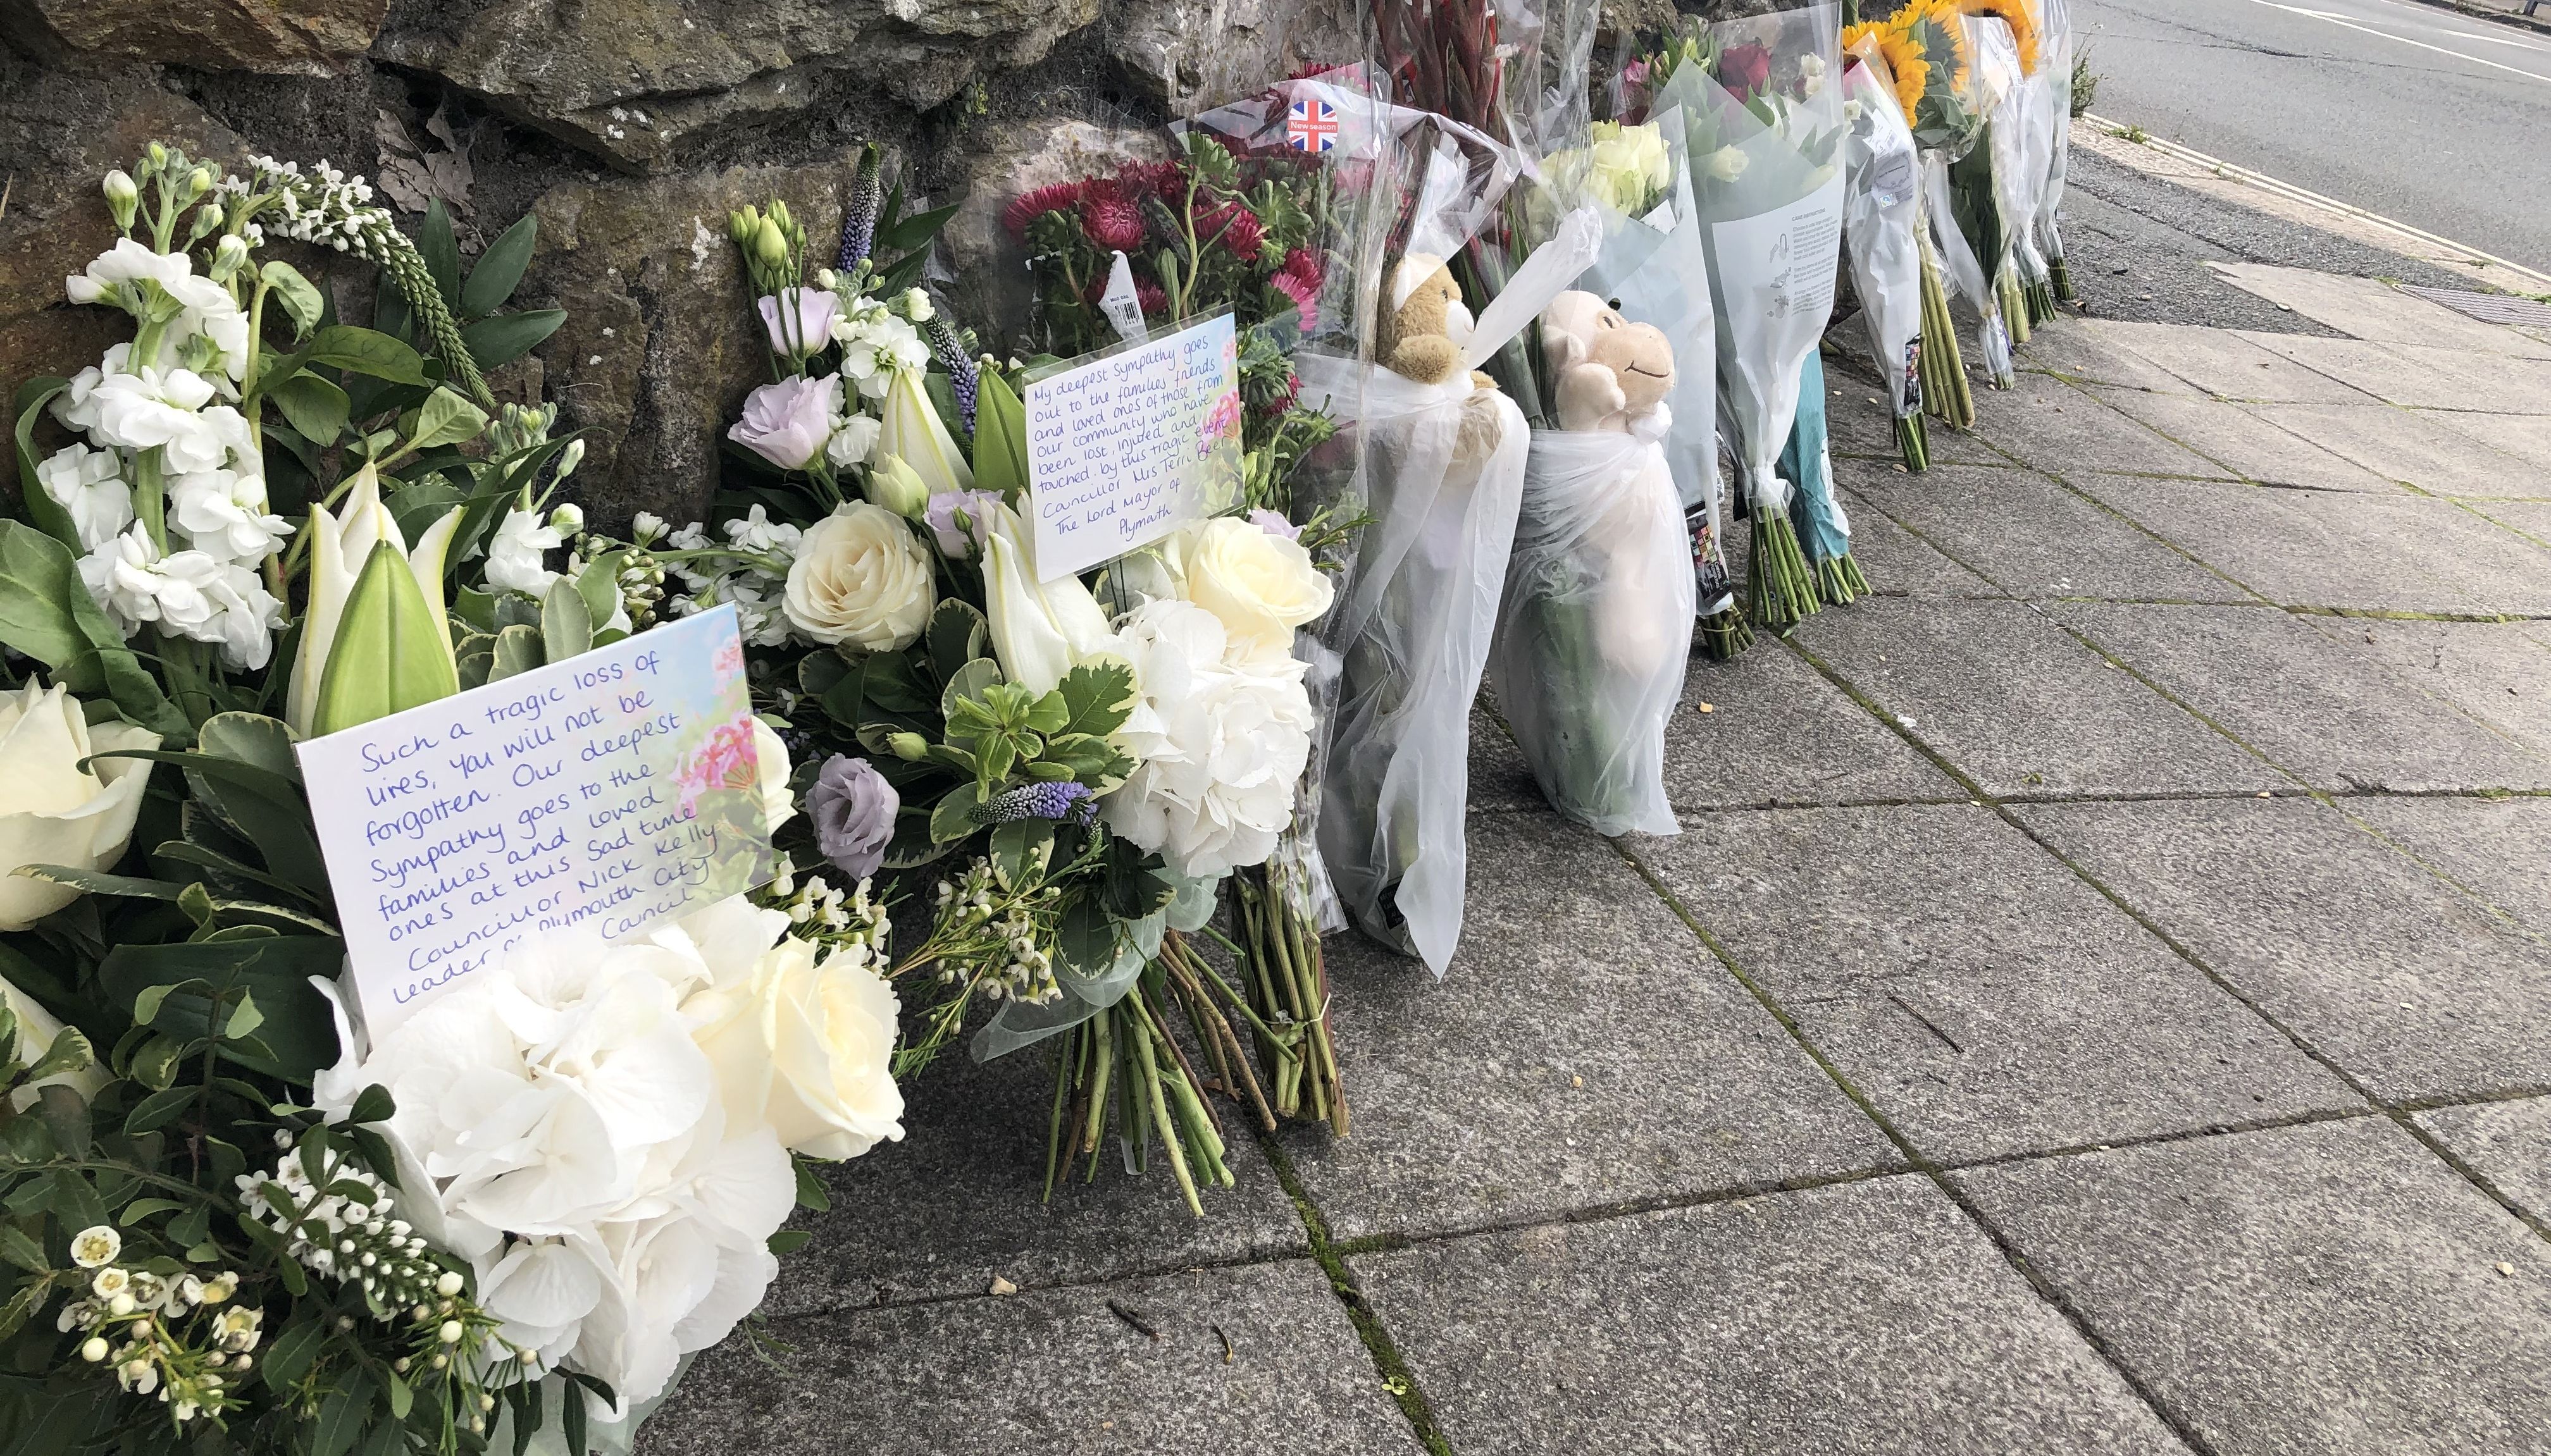 Floral tributes and soft toy tributes left near Biddick Drive in the Keyham area of Plymouth where six people, including the offender, died of gunshot wounds in a firearms incident Thursday evening.